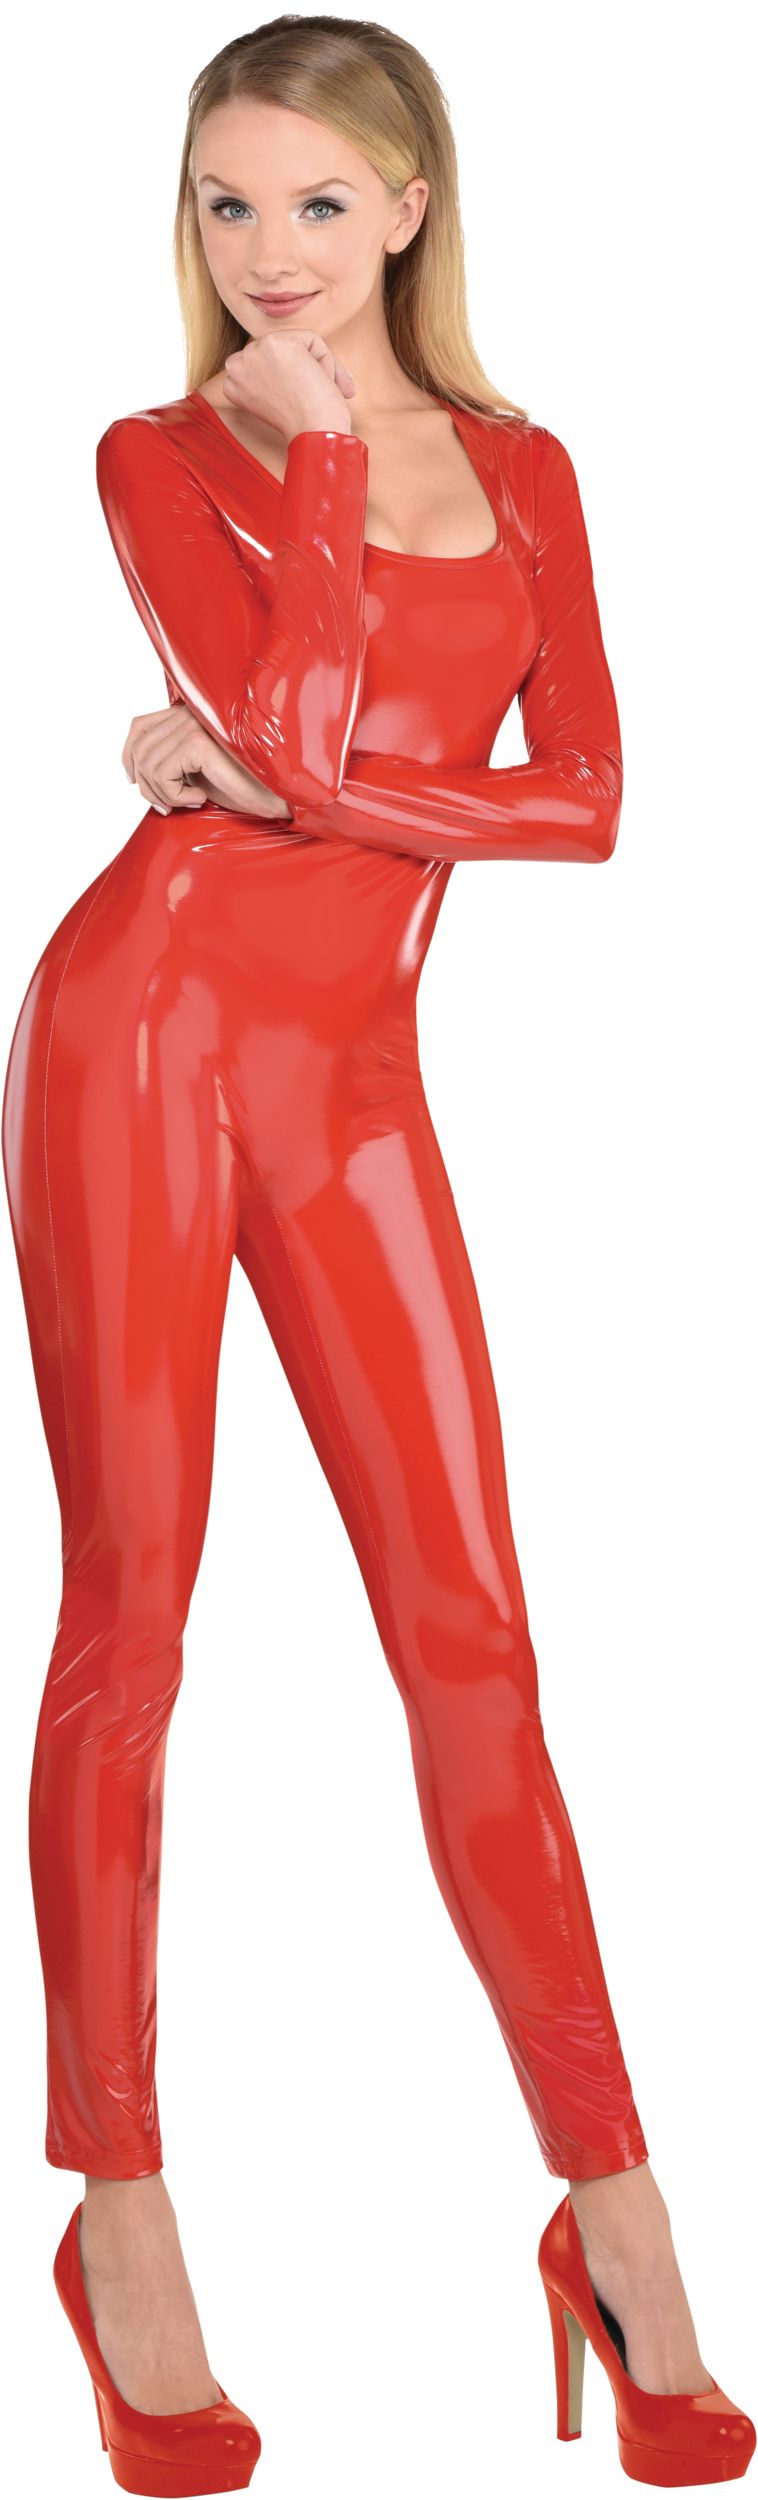 Adult Britney Spears Liquid Spandex Catsuit, Red, Assorted Sizes, Wearable  Costume Accessory for Halloween